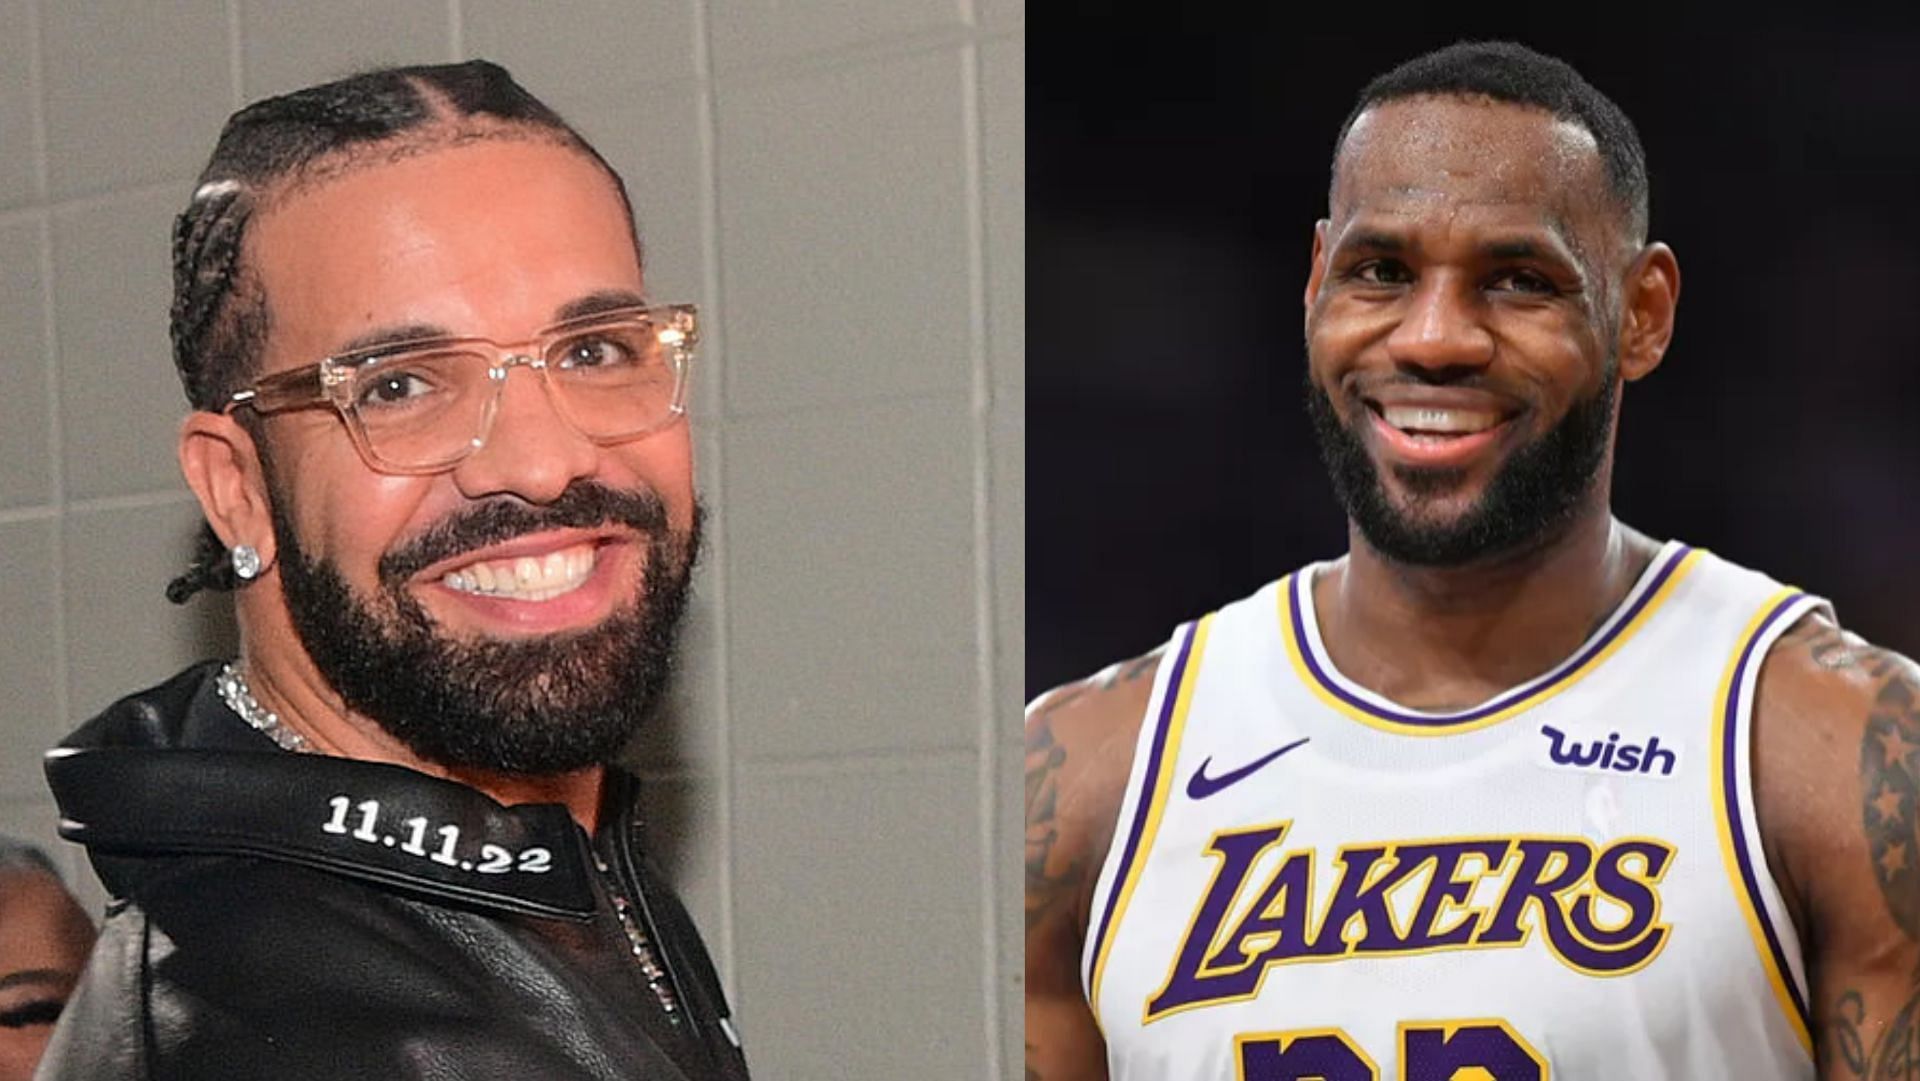 Drake gets trolled by netizens for LeBron James